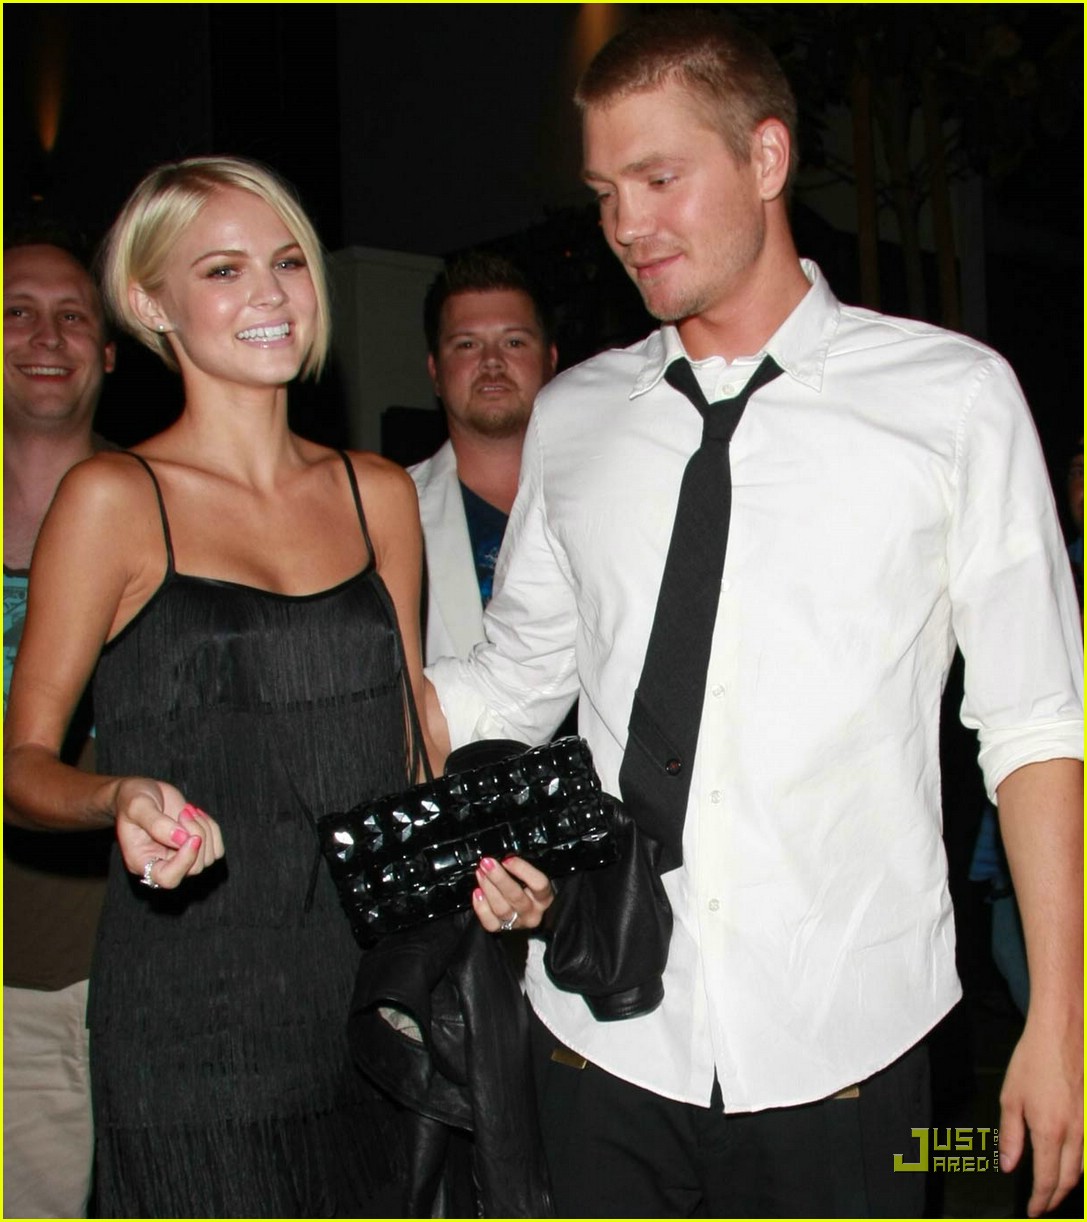 Chad Michael Murray and his fiancée Kenzie Dalton leave STK steakhouse in W...